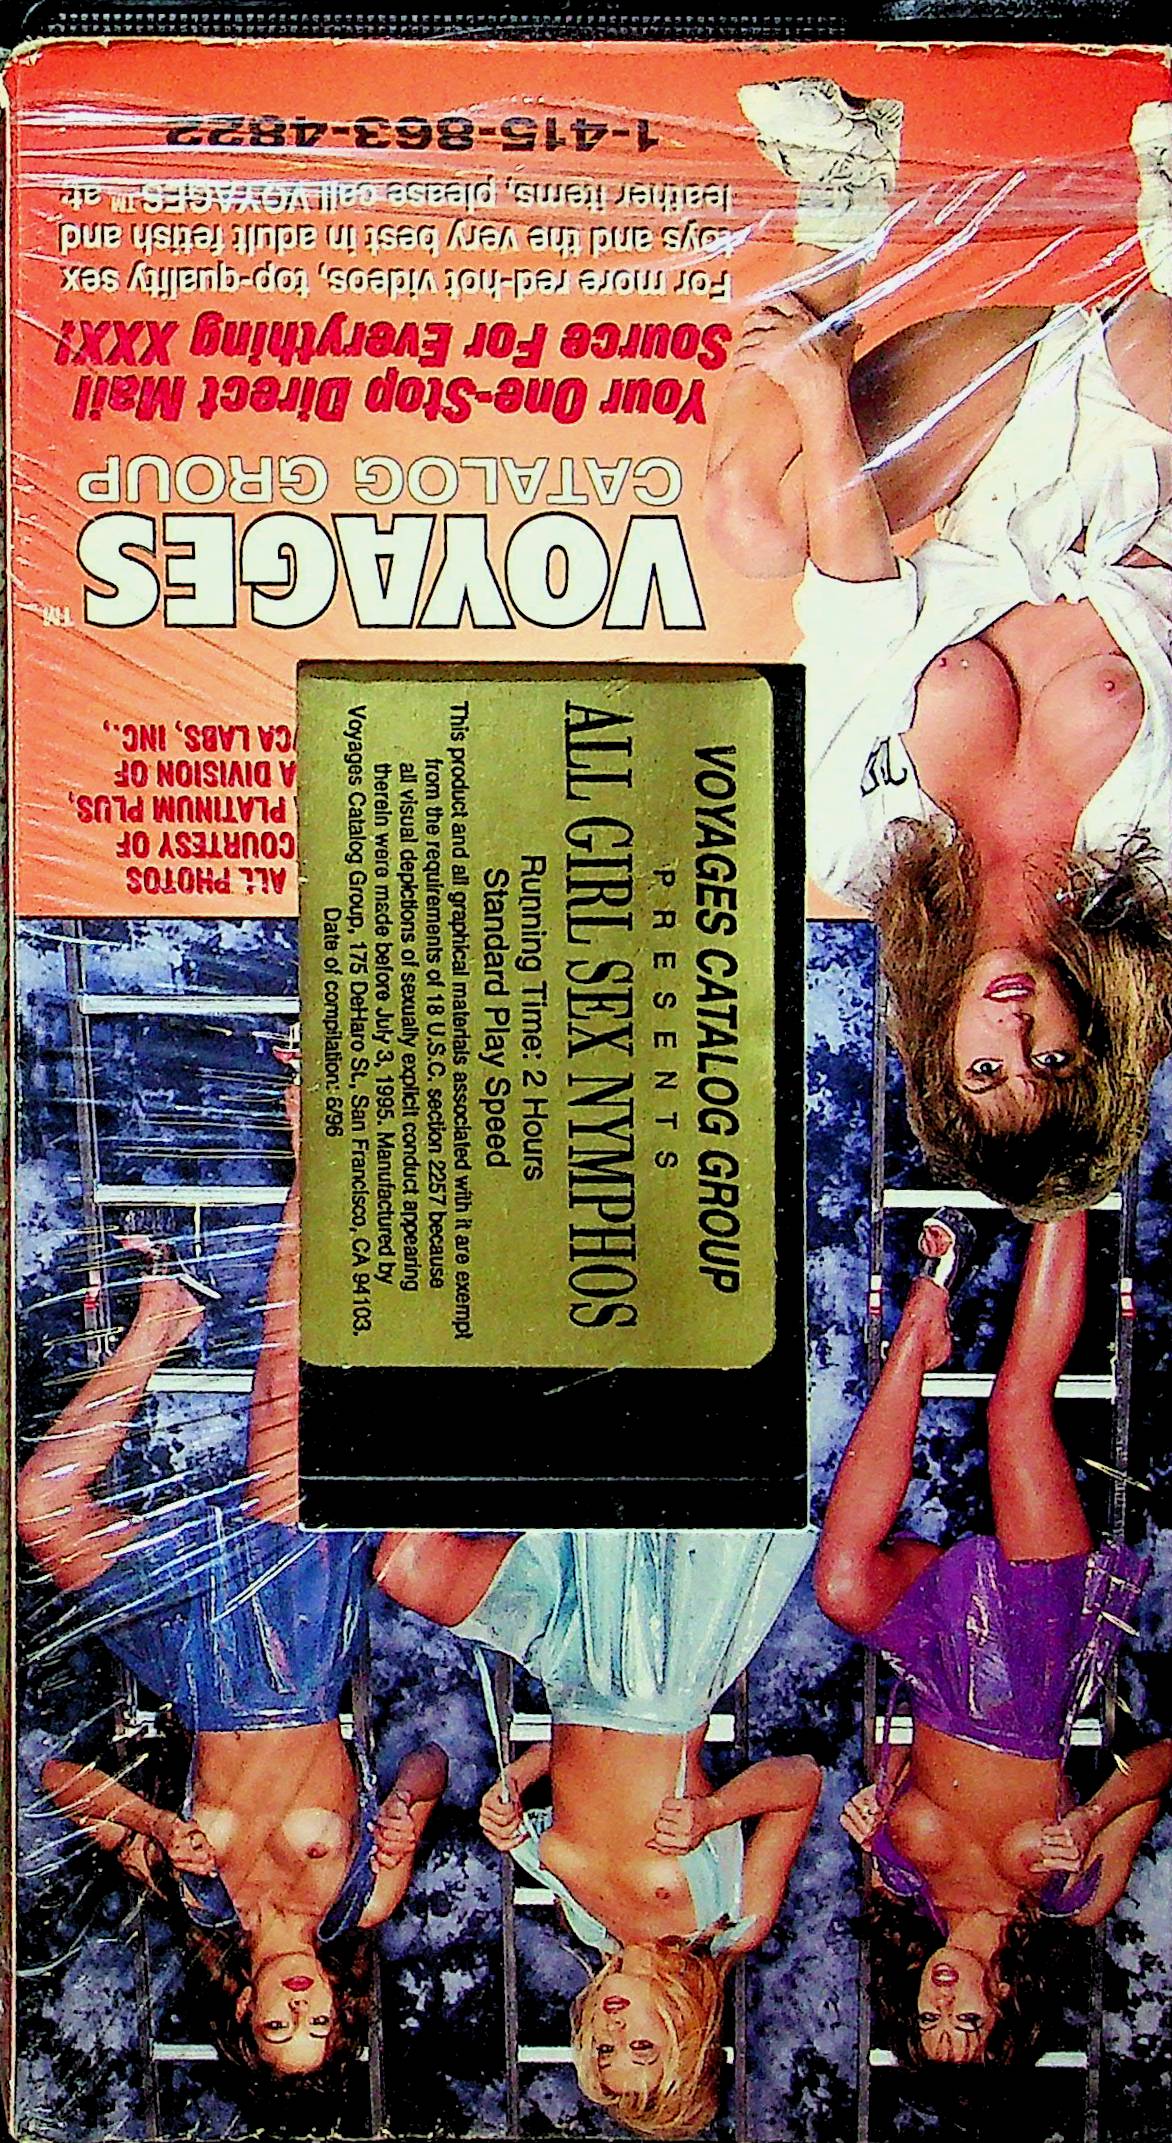 Adult VHS Movie All Girl Sex Nymphos By Voyages Catalog Group 1990s 08